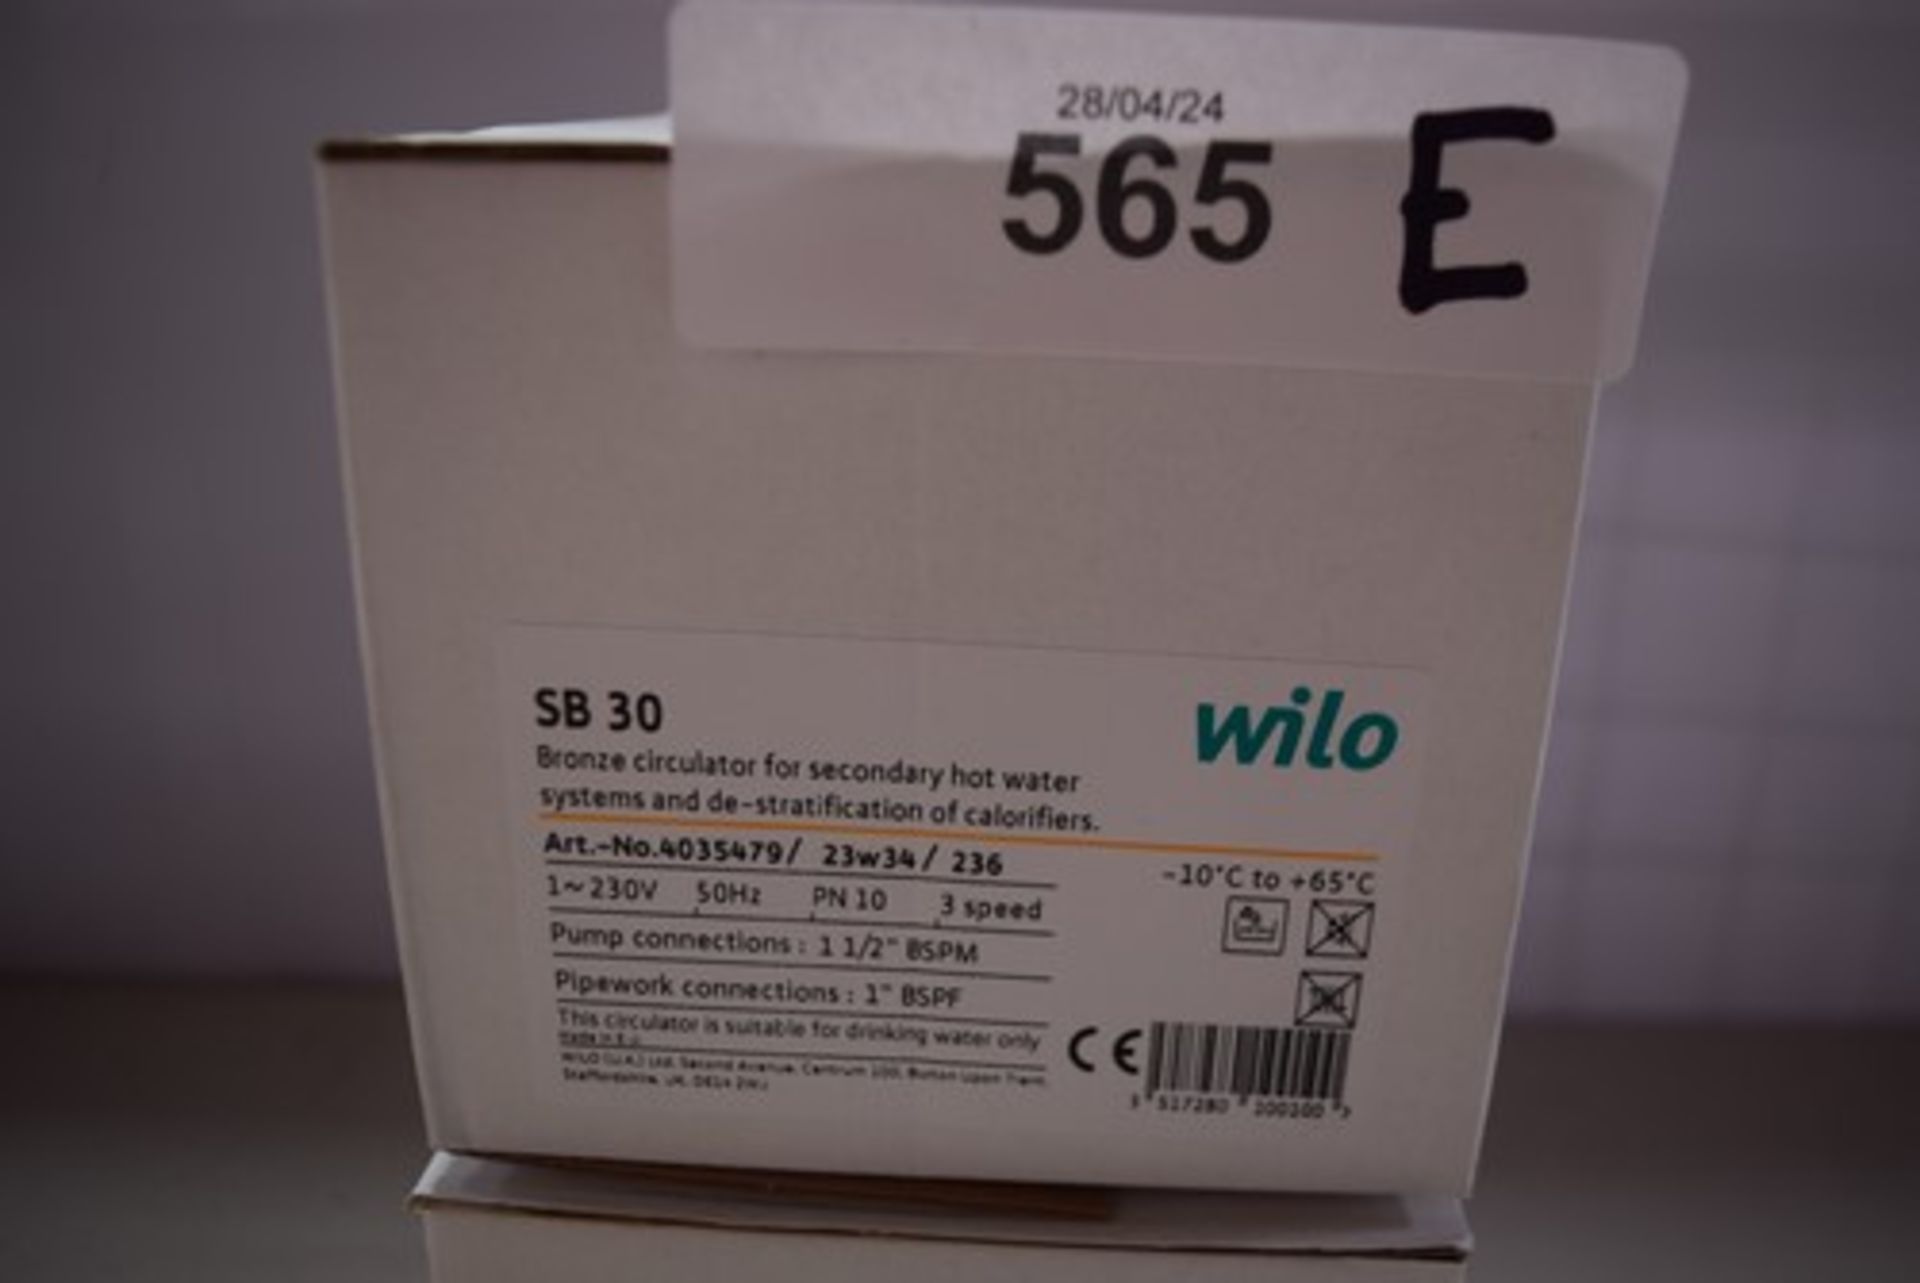 2 x Wilo SB30 secondary circulating pump, item No: 4035479 - new in box (GS30A) - Image 2 of 3